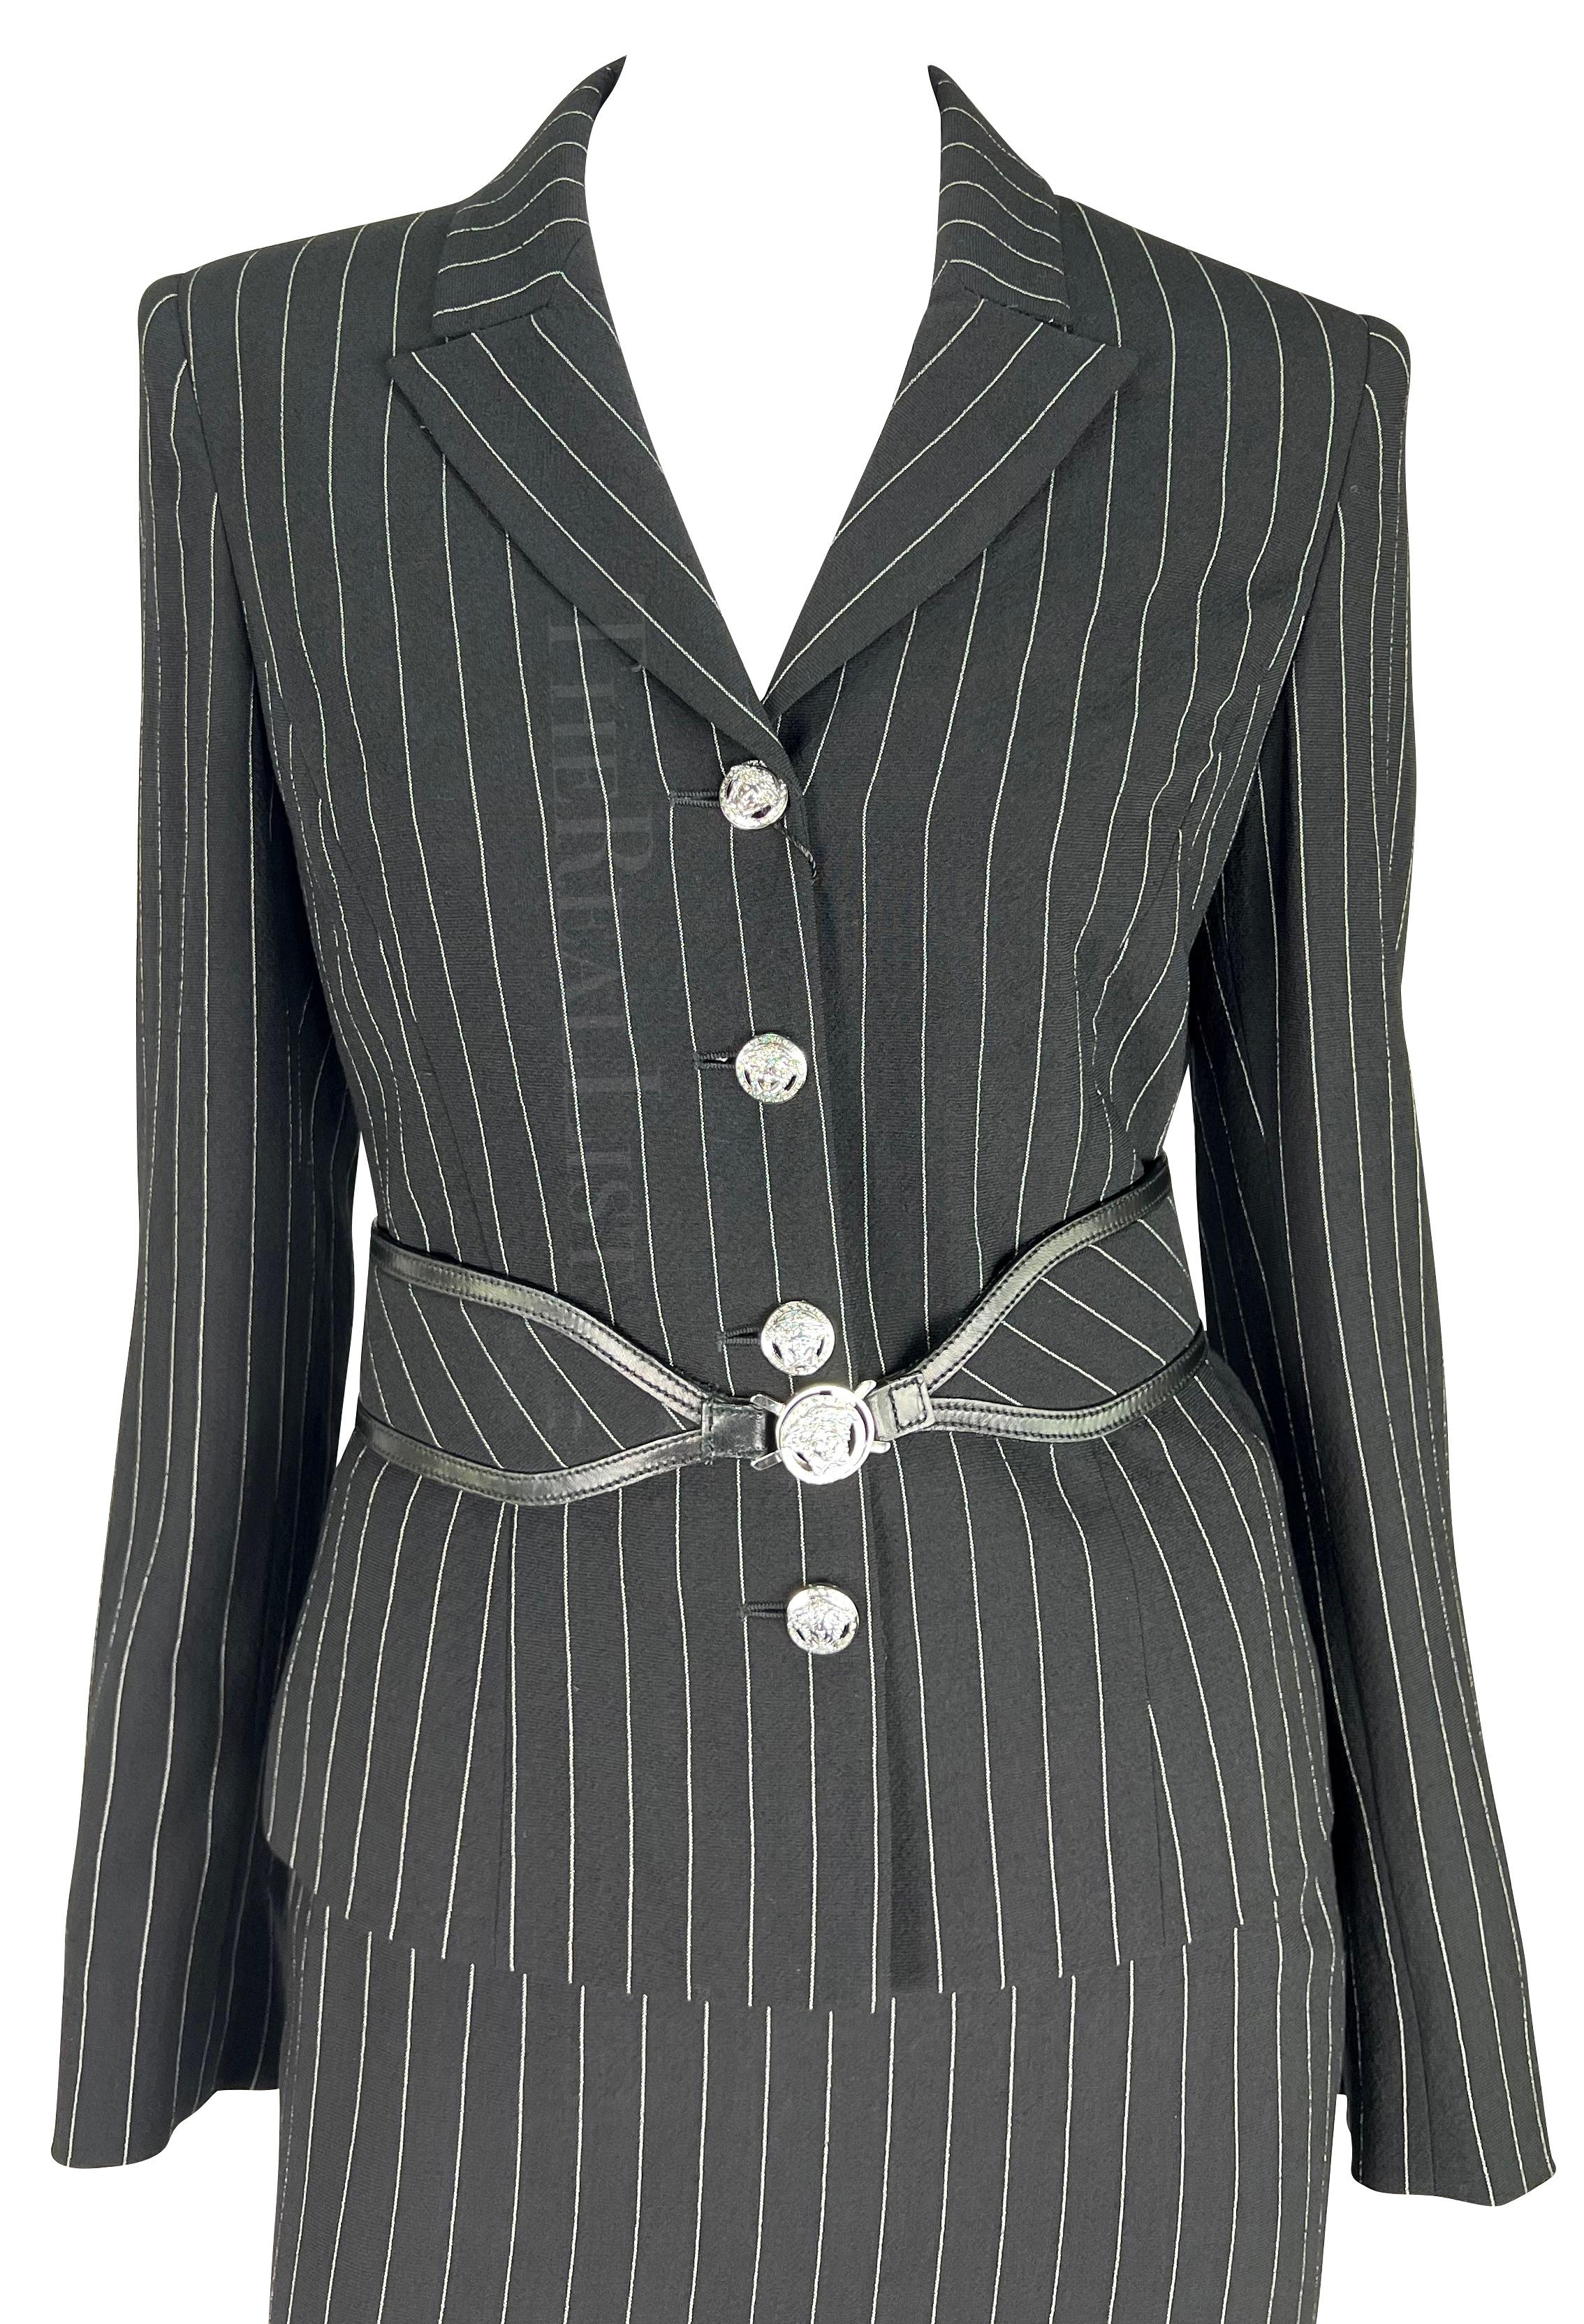 Presenting a black wool pinstripe Versace skirt suit, designed by Donatella Versace. From the Fall/Winter 2004 collection, this coordinated ensemble includes a pinstriped blazer, skirt, and belt. Its traditional silhouette is uplifted by shiny